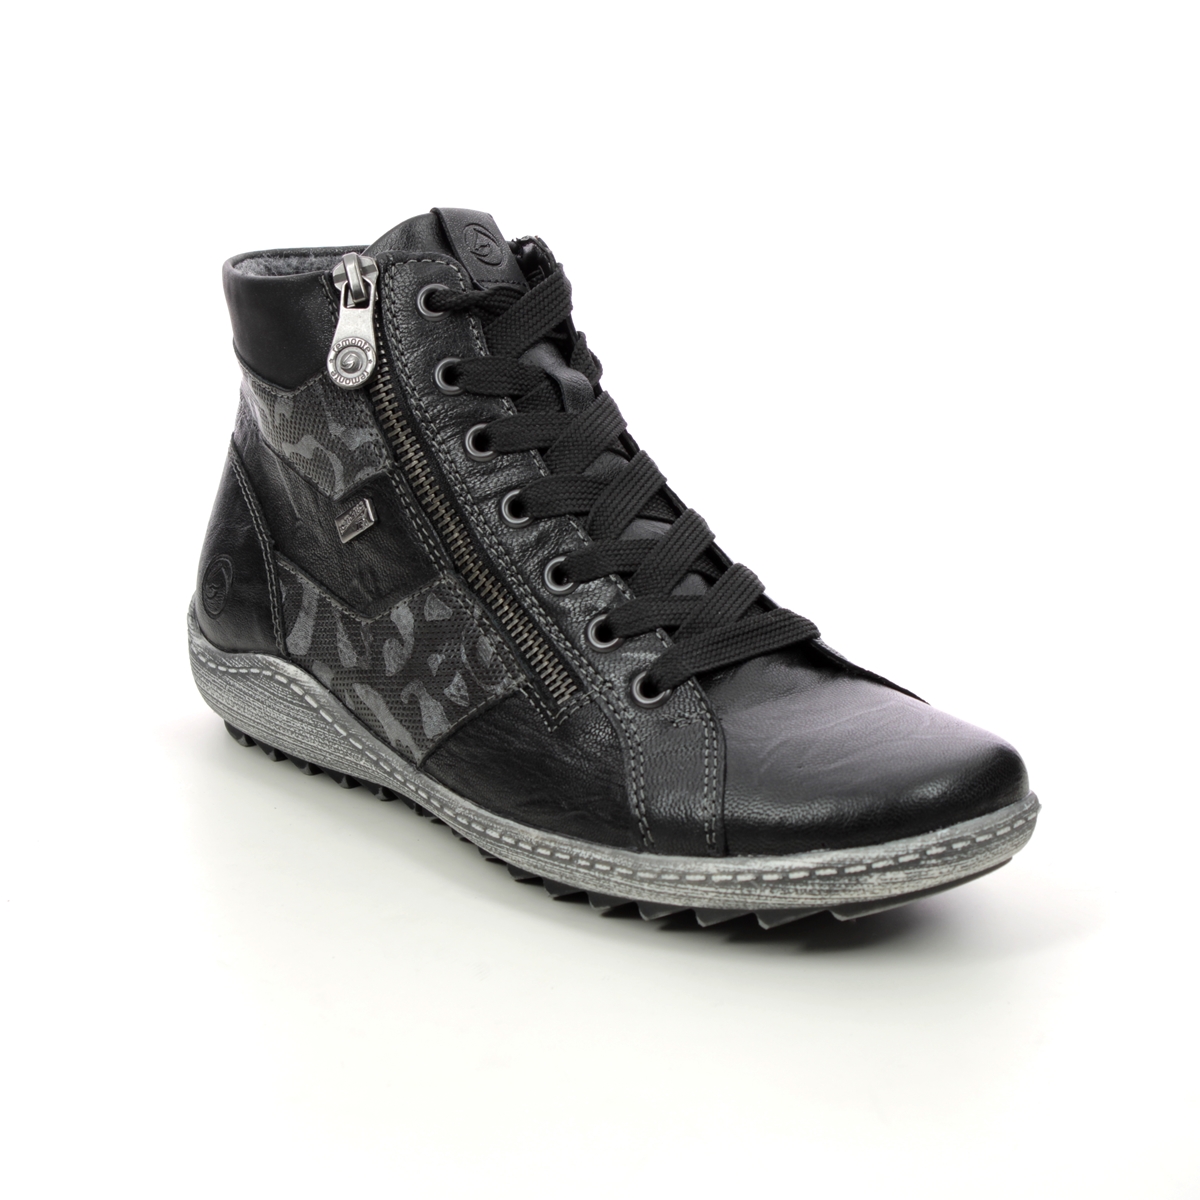 Remonte Ziginzips Tex Black Leather Womens Hi Tops R1484-02 In Size 38 In Plain Black Leather